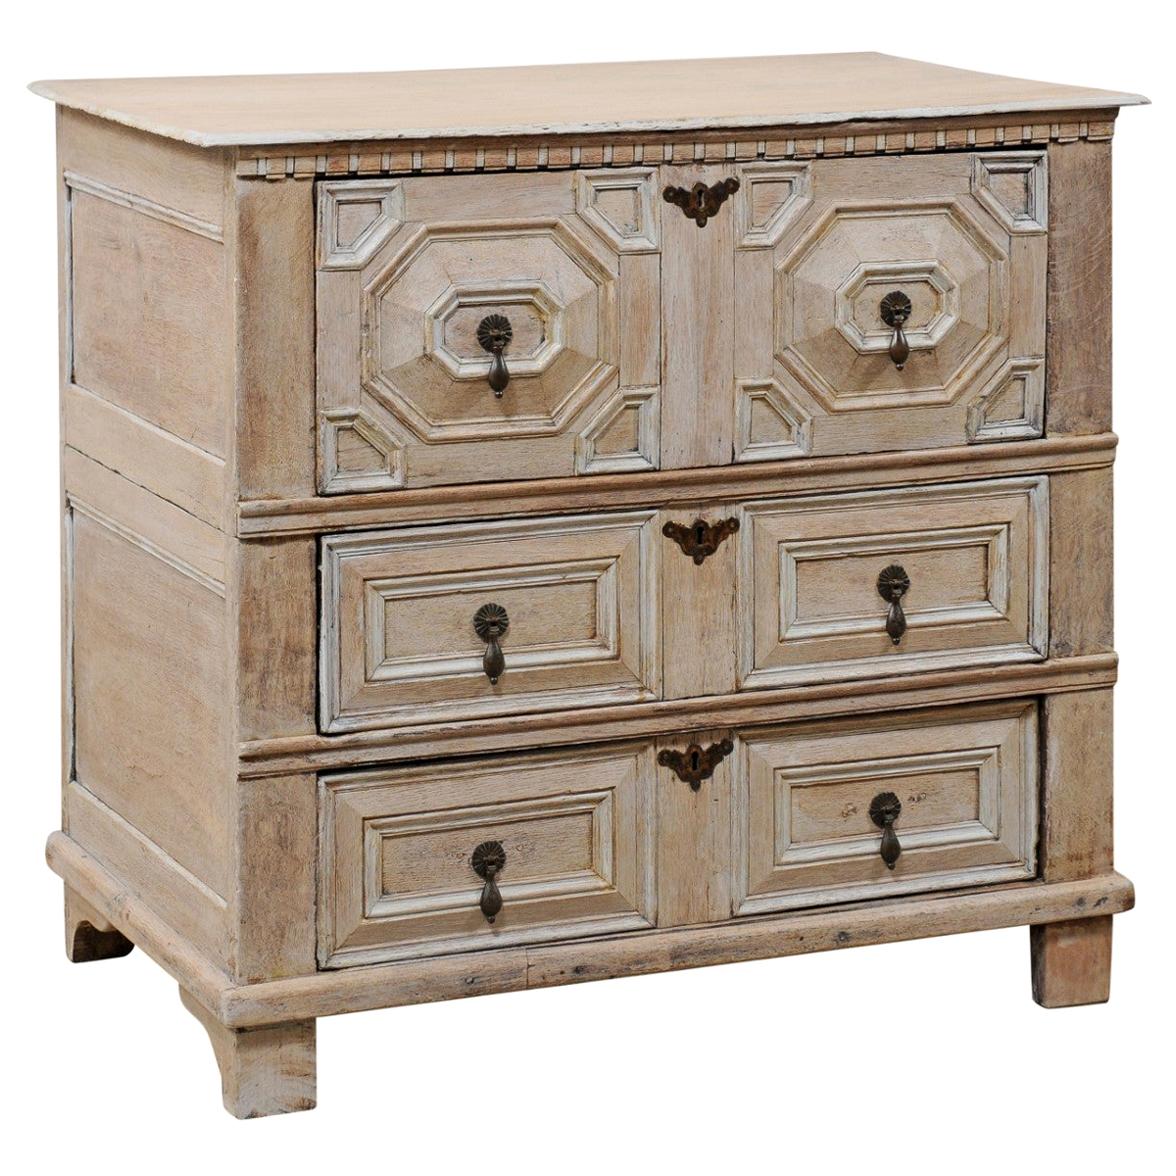 18th Century English Ornately Paneled Oak Chest Carved in Geometrical Motif